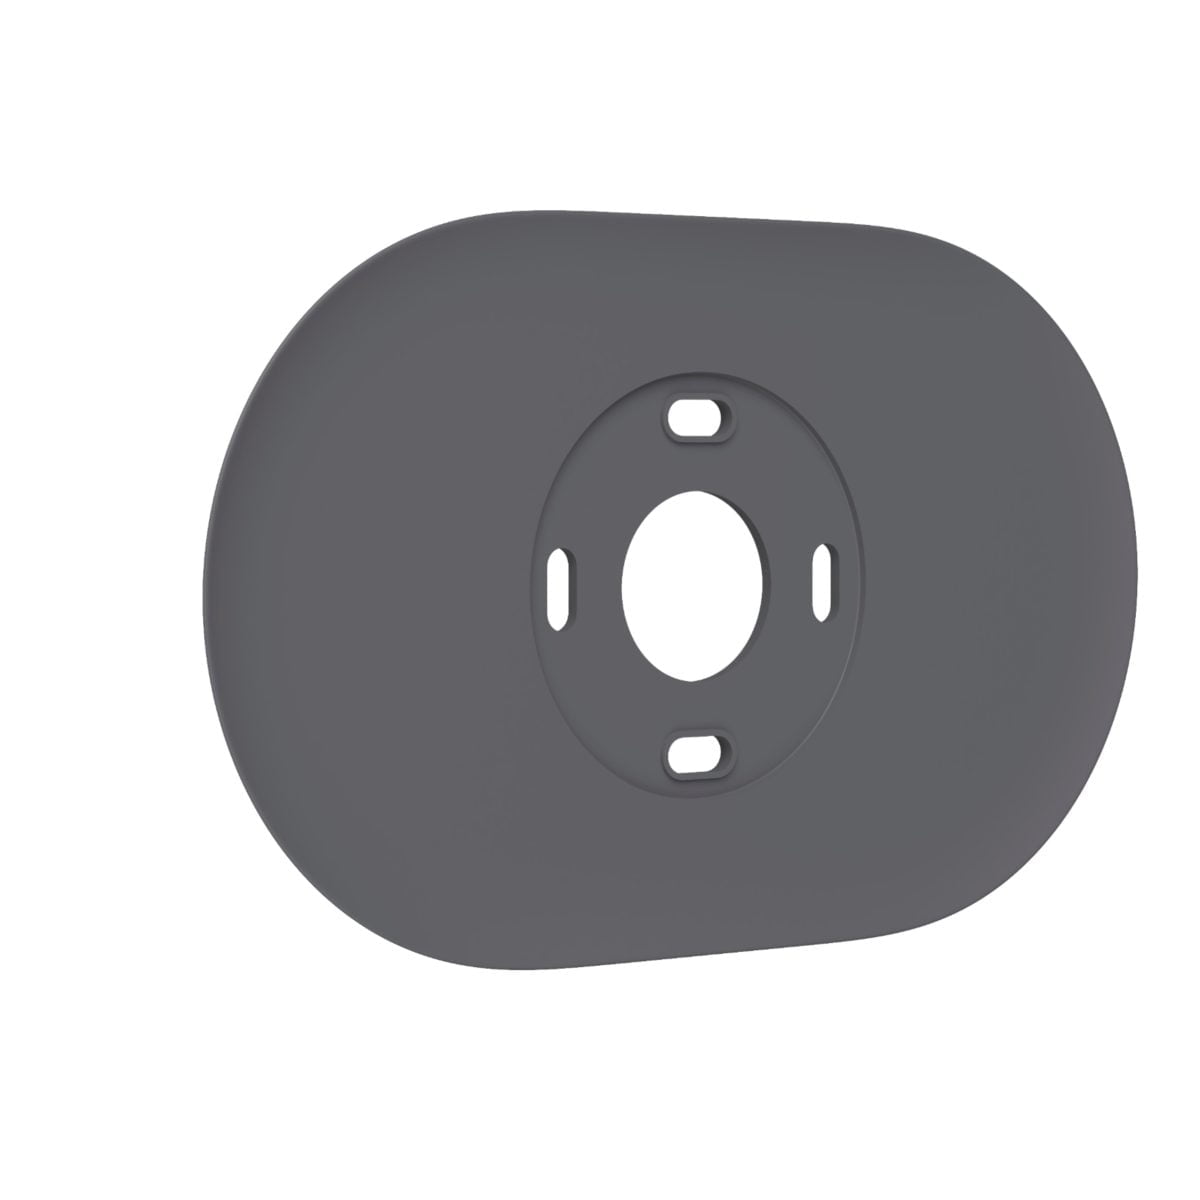 6428308Cv11D Scaled Google &Lt;H1&Gt;Google Nest Thermostat Trim Kit - Charcoal&Lt;/H1&Gt; &Lt;Span Style=&Quot;Color: #040C13; Font-Family: 'Human Bby Digital', 'Human Fallback', Arial, Helvetica, Sans-Serif; Font-Size: 13Px;&Quot;&Gt;The Nest Thermostat'S Perfect Match. Designed To Cover Any Imperfections On A Wall From Removing Your Old Thermostat. It Also Includes A Steel Plate For Installing The Thermostat Over An Electrical Box. And It Comes In Perfectly Matched Nest Thermostat Colors.&Lt;/Span&Gt; &Lt;Strong&Gt;&Lt;Span Class=&Quot;A-List-Item&Quot;&Gt; &Lt;B&Gt;We Also Provide International Wholesale And Retail Shipping To All Gcc Countries: Saudi Arabia, Qatar, Oman, Kuwait, Bahrain.&Lt;/B&Gt;&Lt;/Span&Gt;&Lt;/Strong&Gt; Google Nest Thermostat Trim Kit Google Nest Thermostat Trim Kit - Charcoal